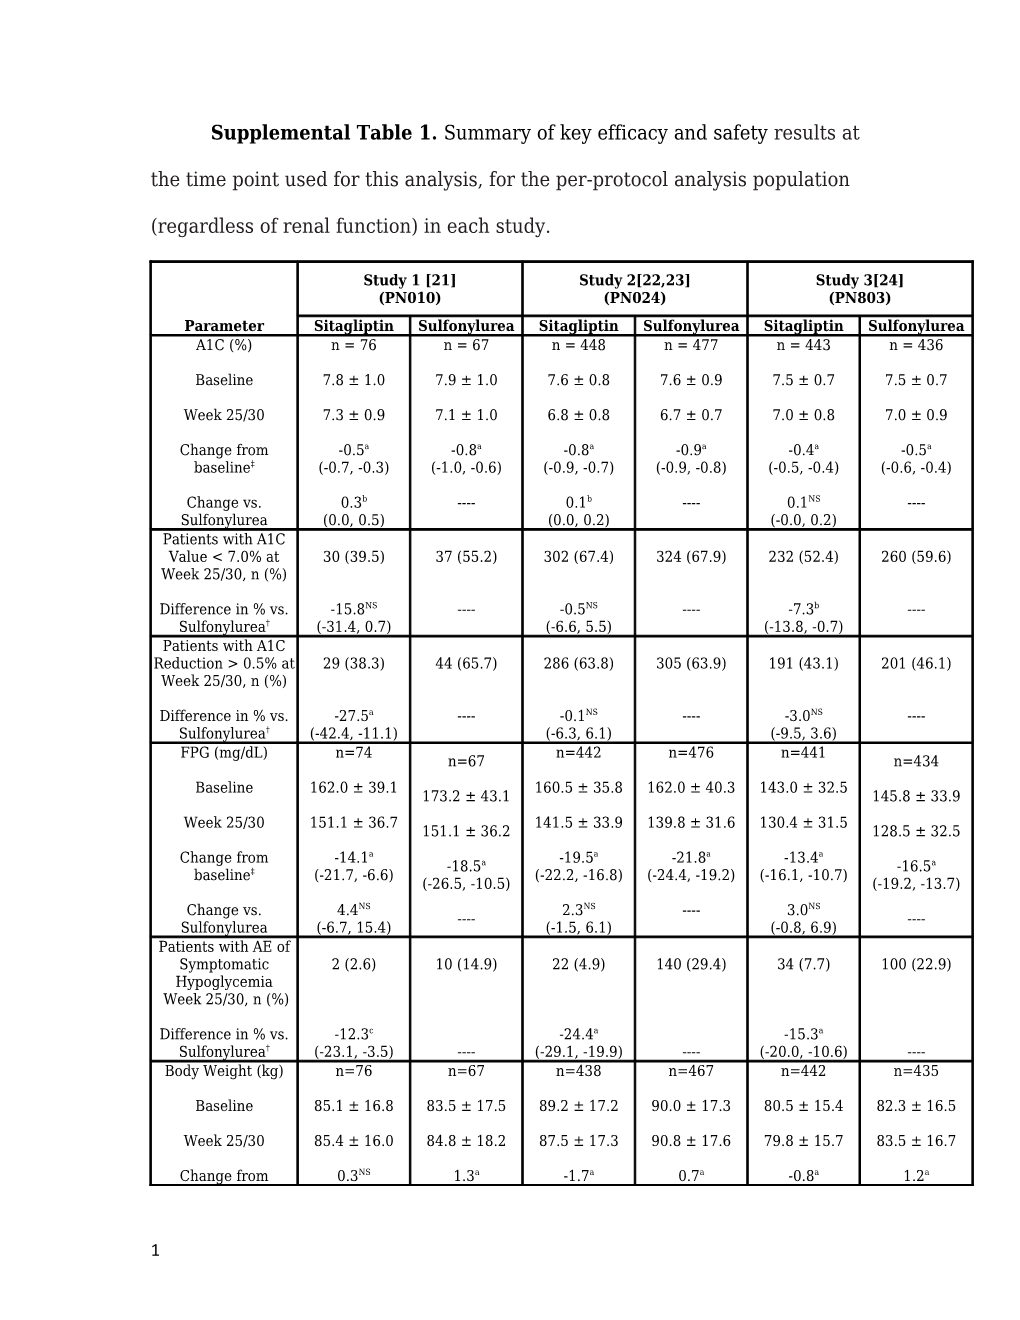 Supplemental Table 1. Summary of Key Efficacy and Safety Results at the Time Point Used